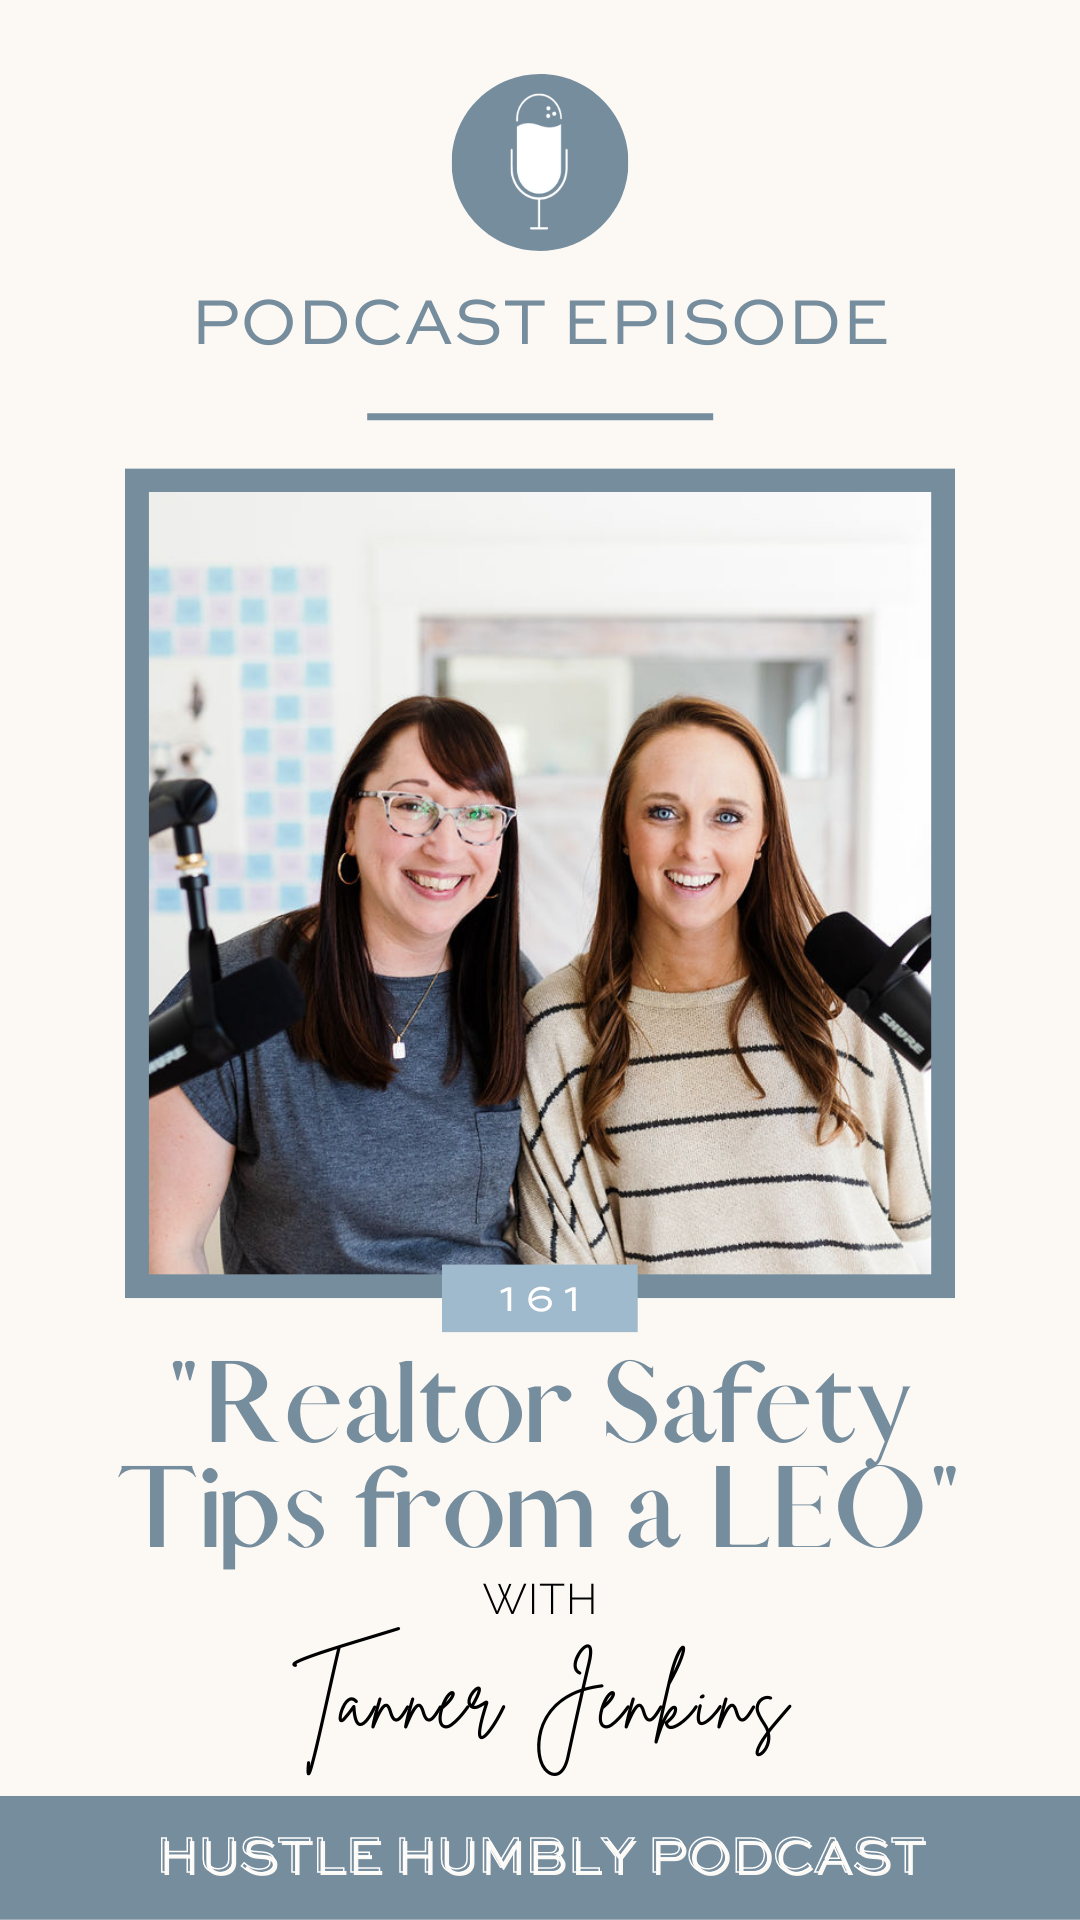 Hustle Humbly Podcast Episode 161: Realtor Safety Tips from a LEO